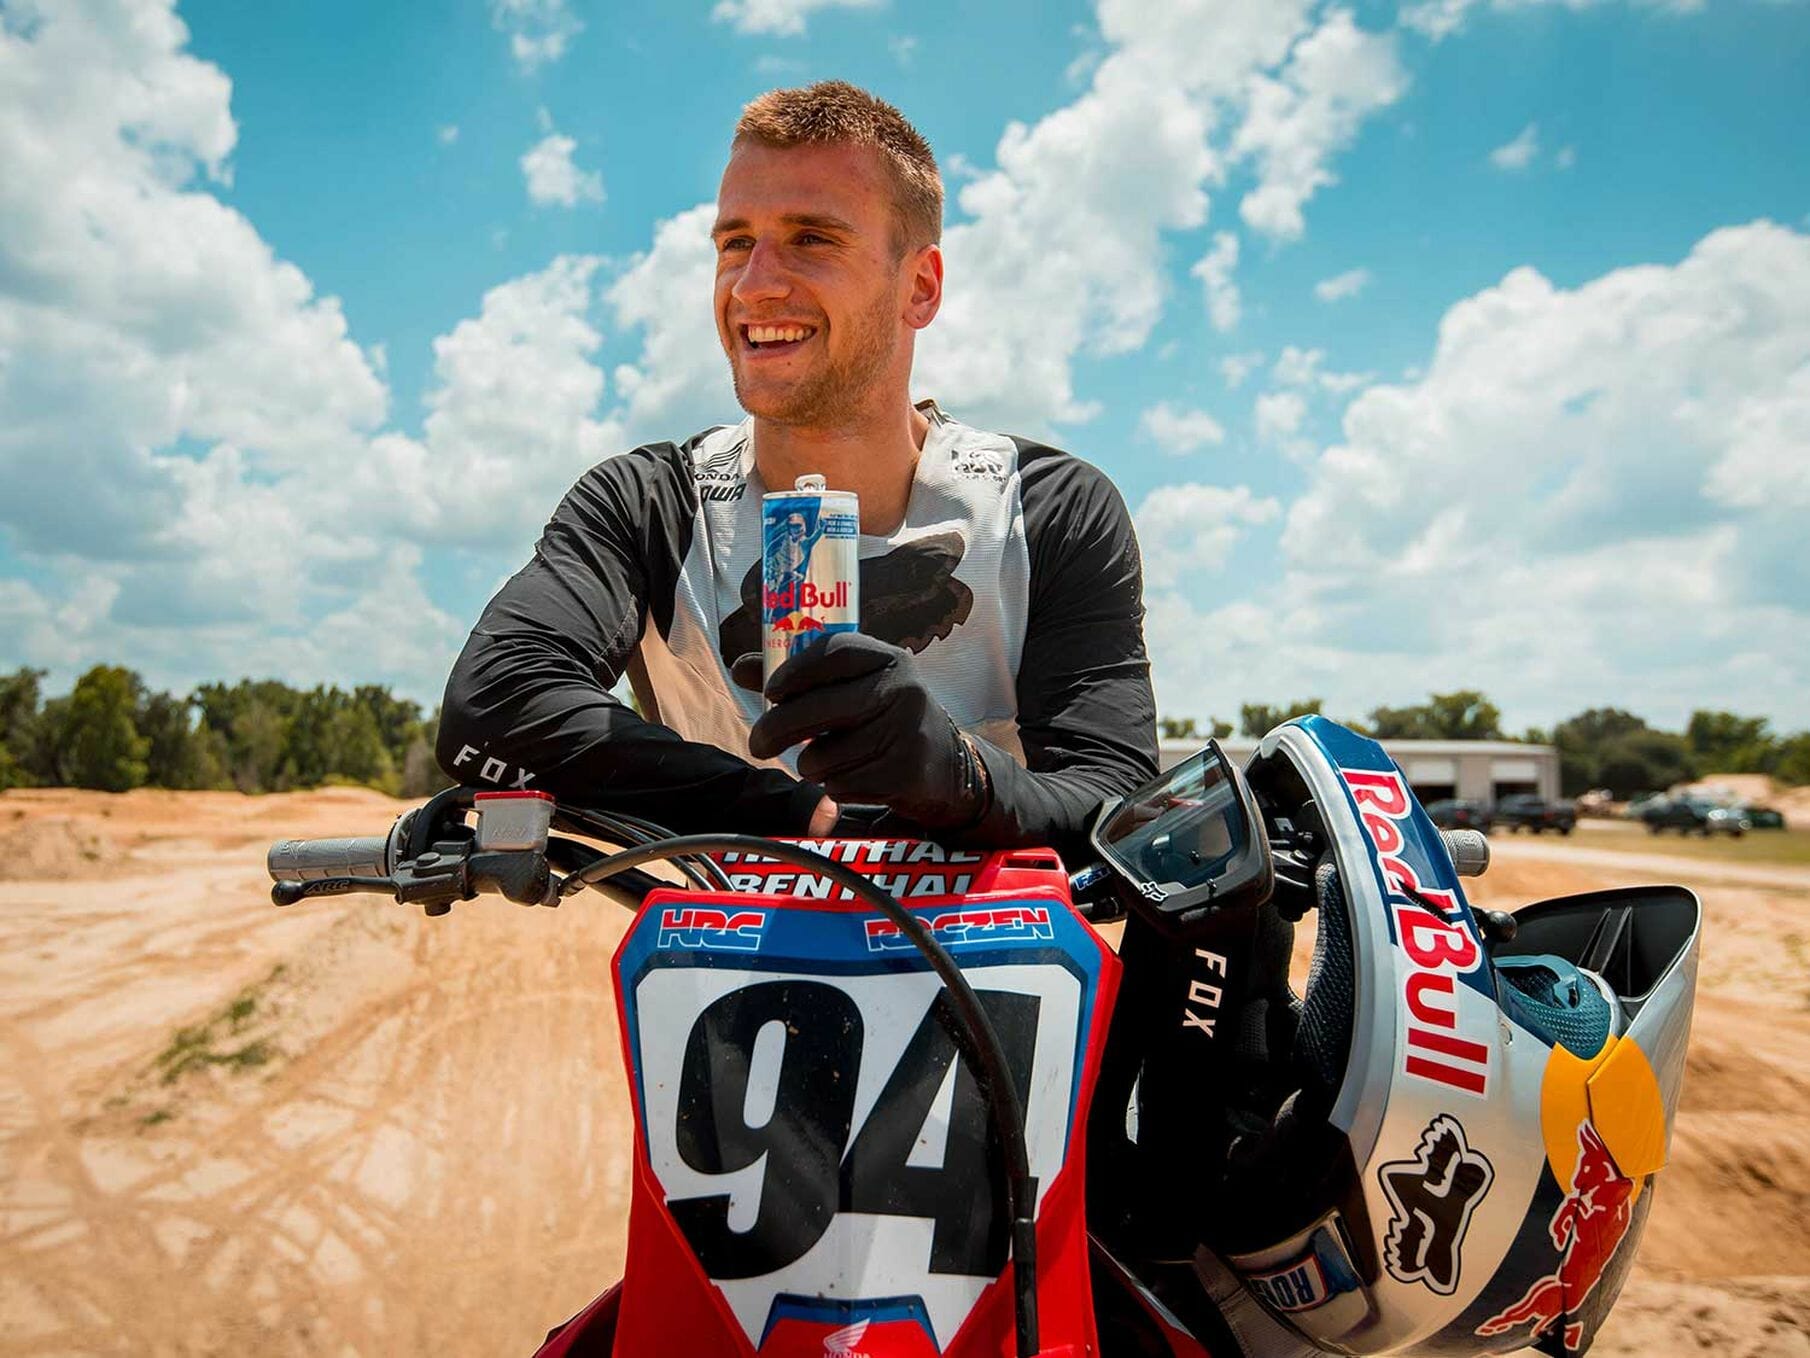 Ken Roczen takes a break due to health problems
- also in the MOTORCYCLES.NEWS APP